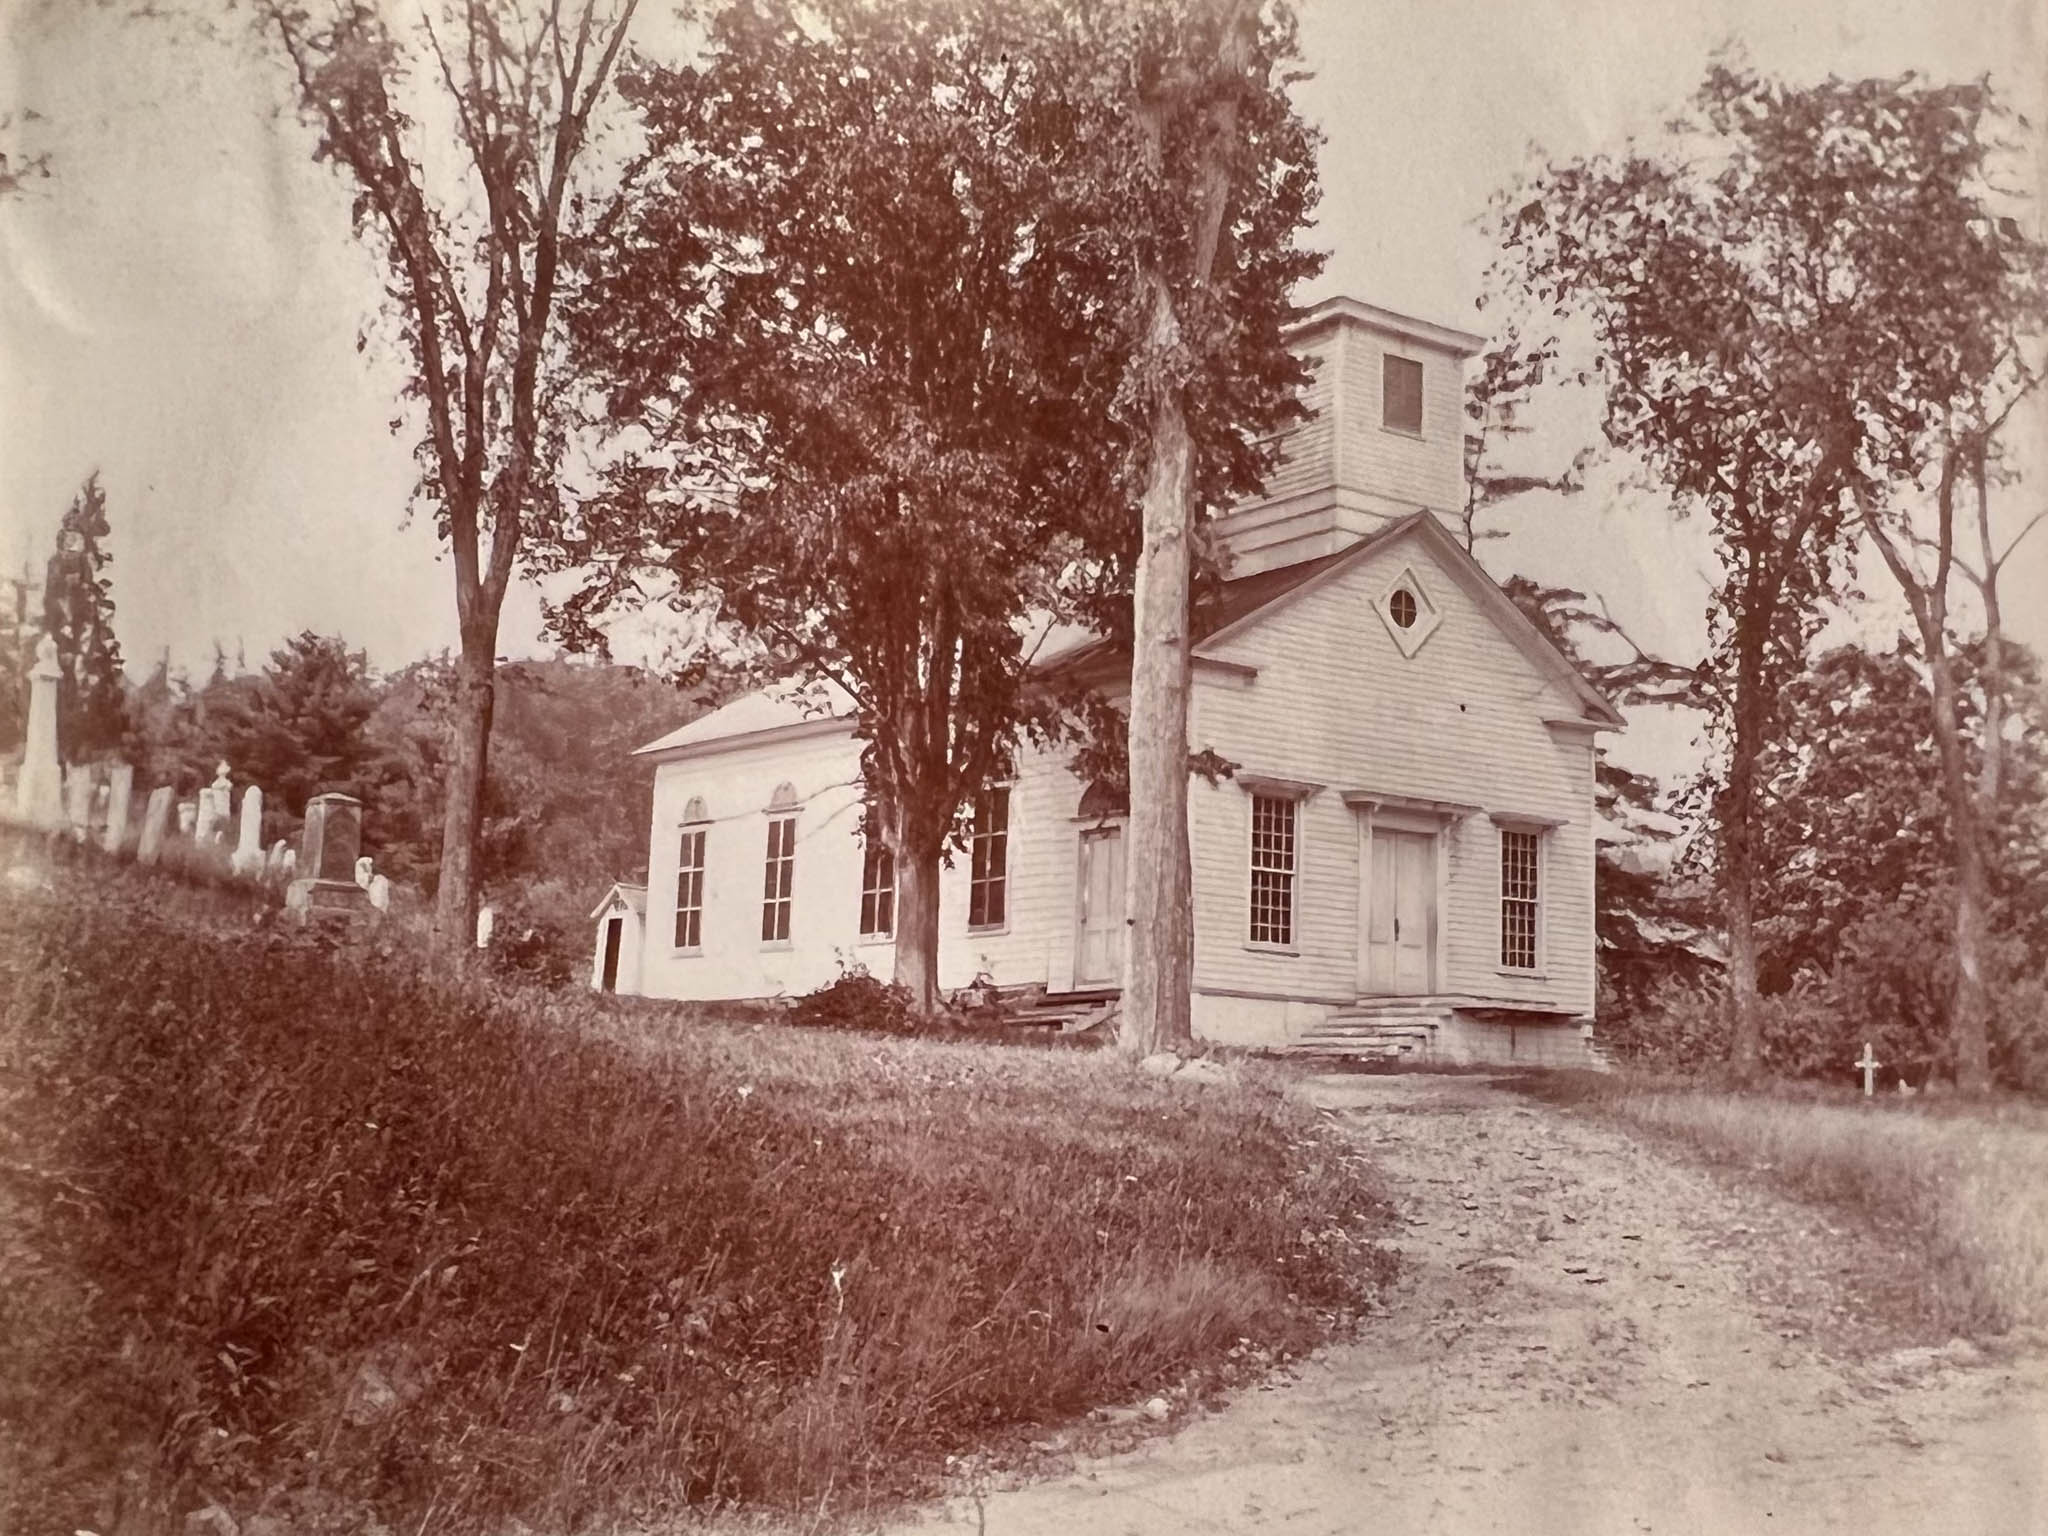 Eberle photo of Red Rock Cemetery and Christian Church